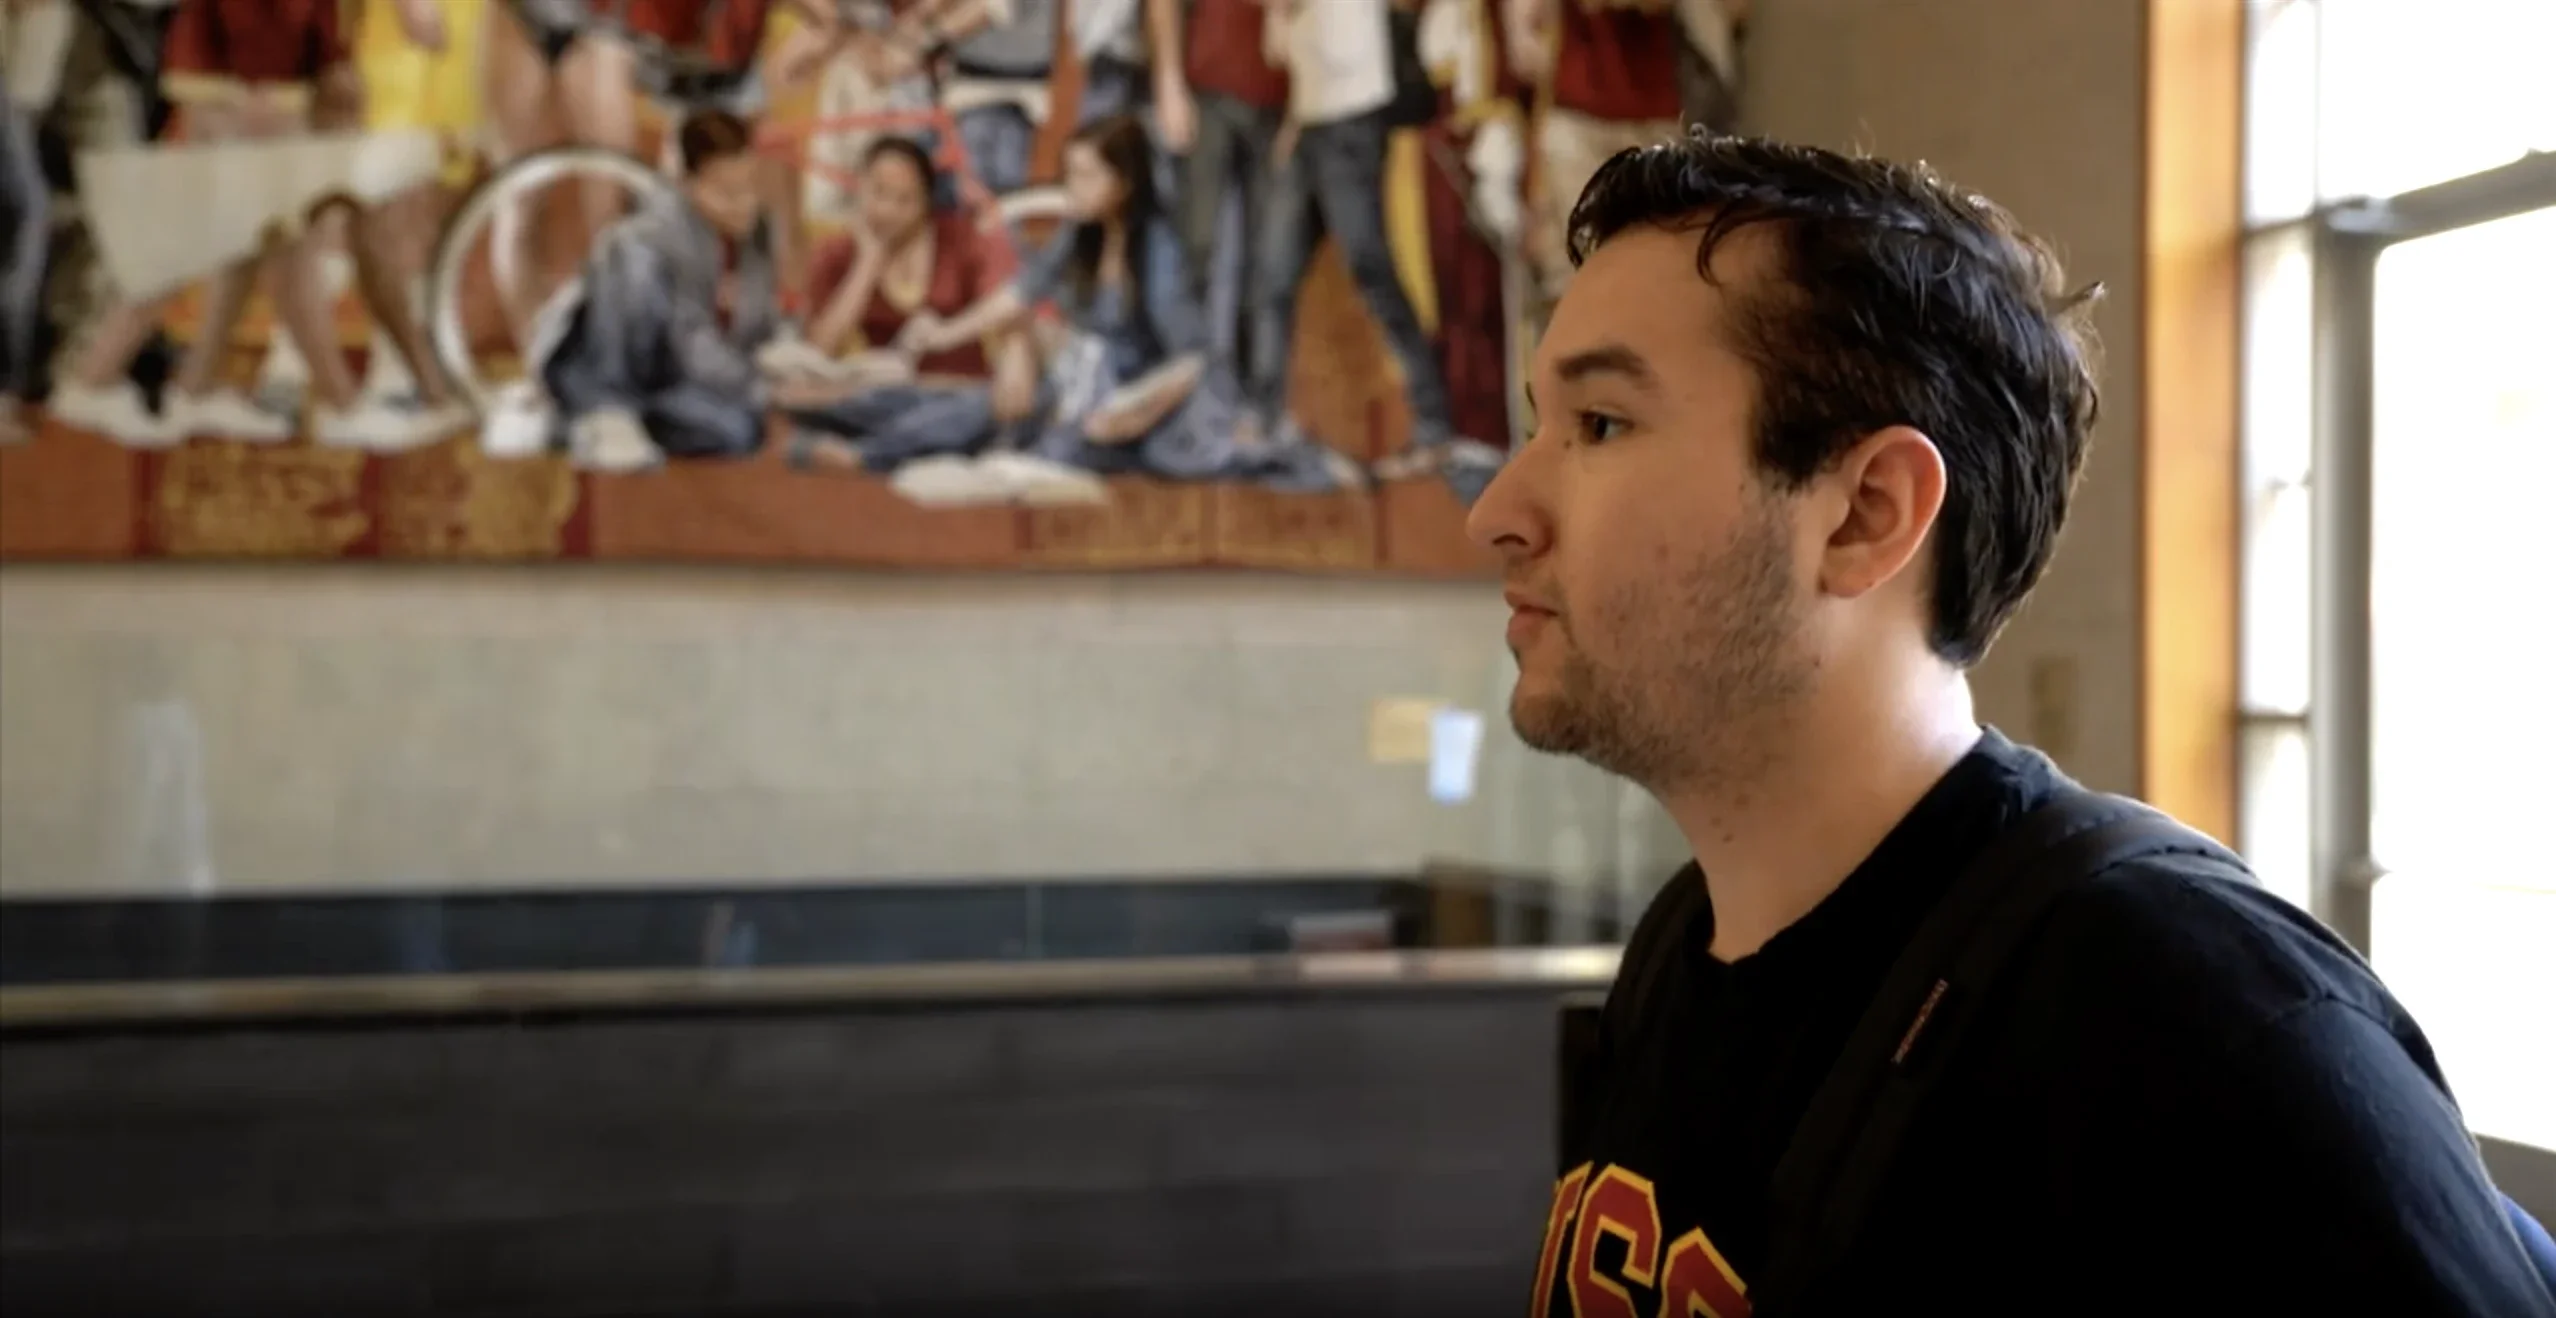 Side profile of a USC student wearing a black shirt